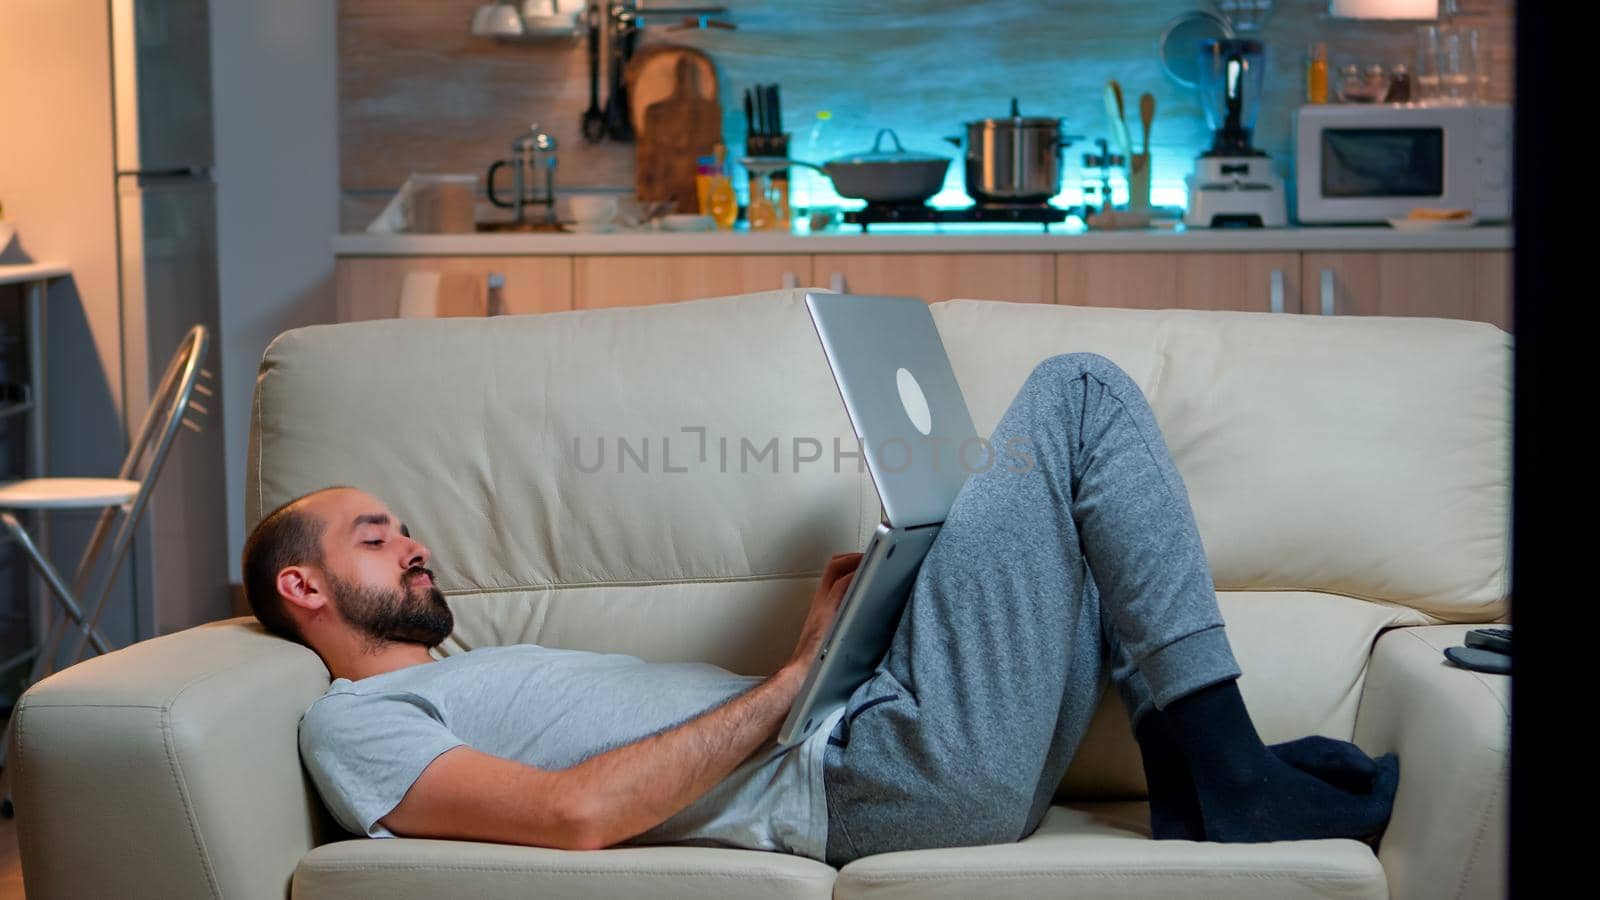 Man falling asleep in fron of TV while working on the laptop. Cozy man lying down on sofa while typing on laptop computer for social media project. Exhausted man working